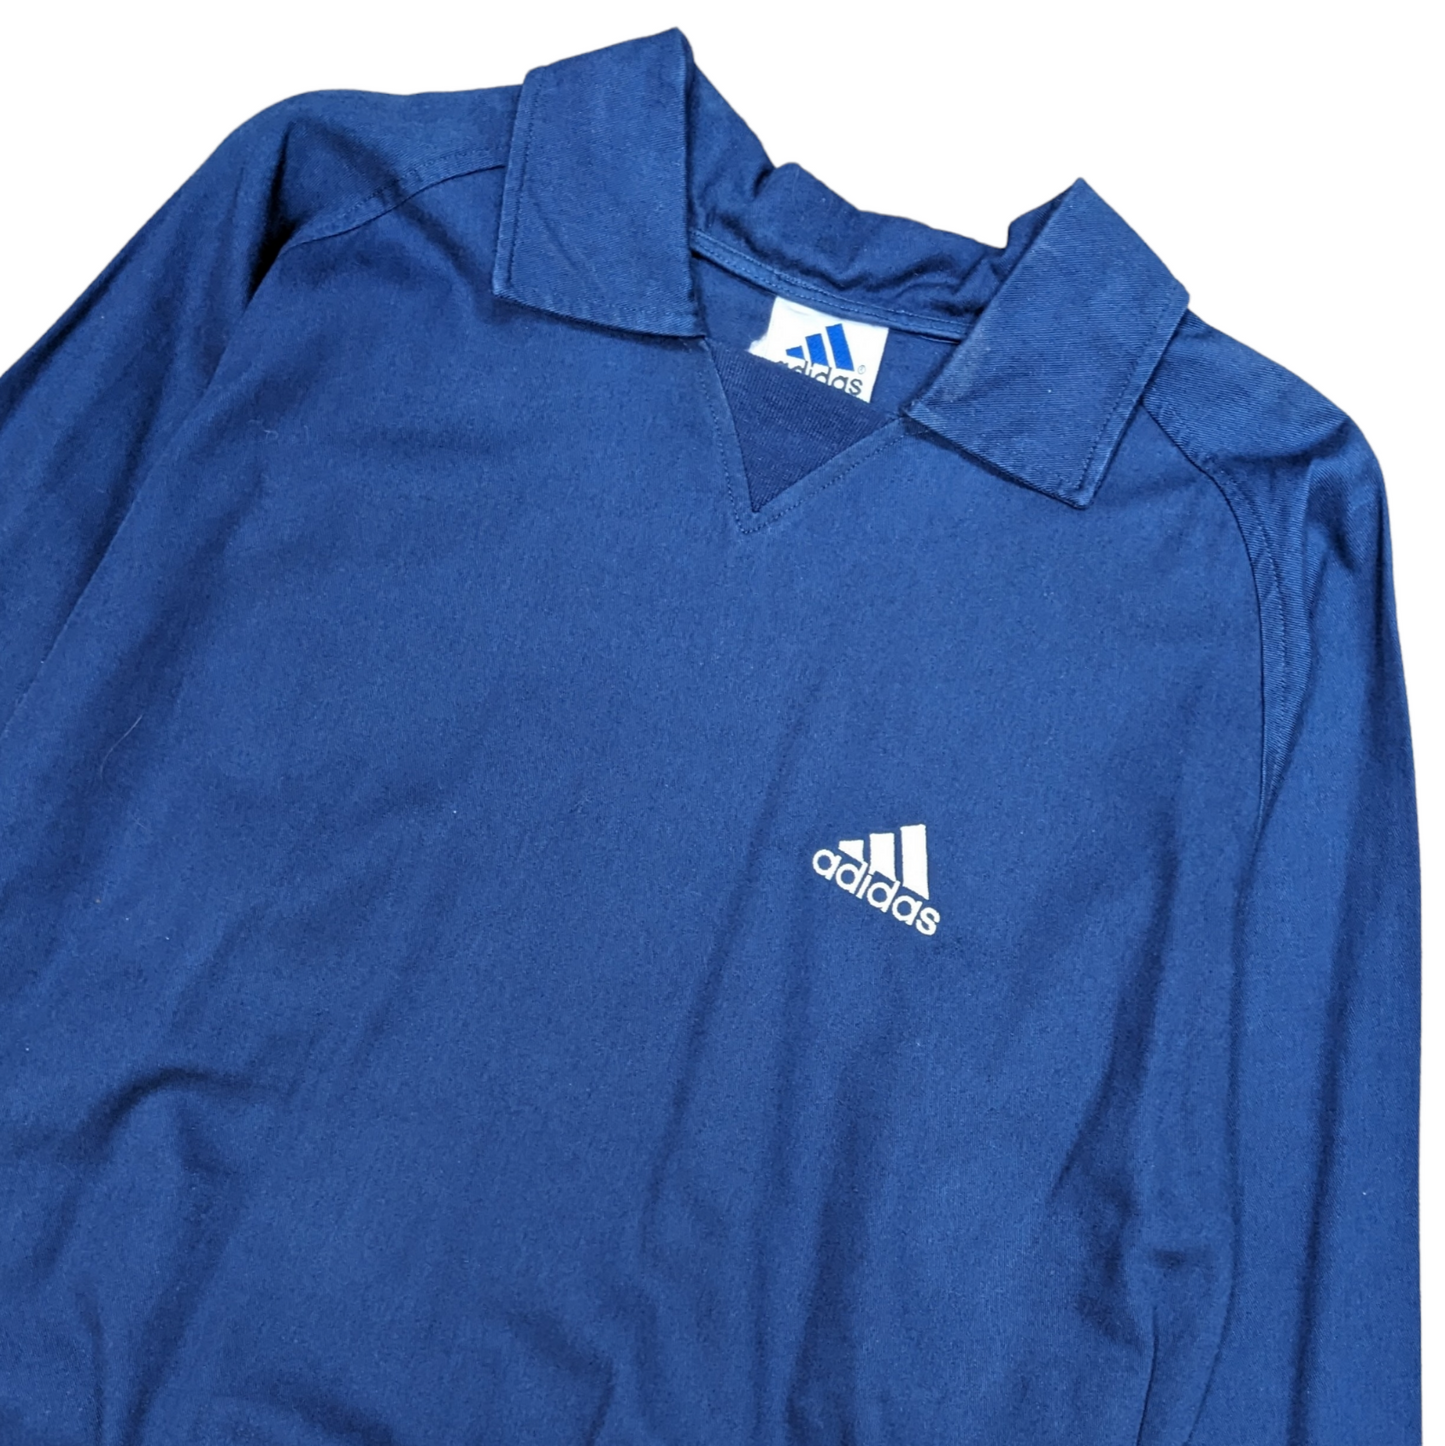 90s Adidas Drill Top Size S